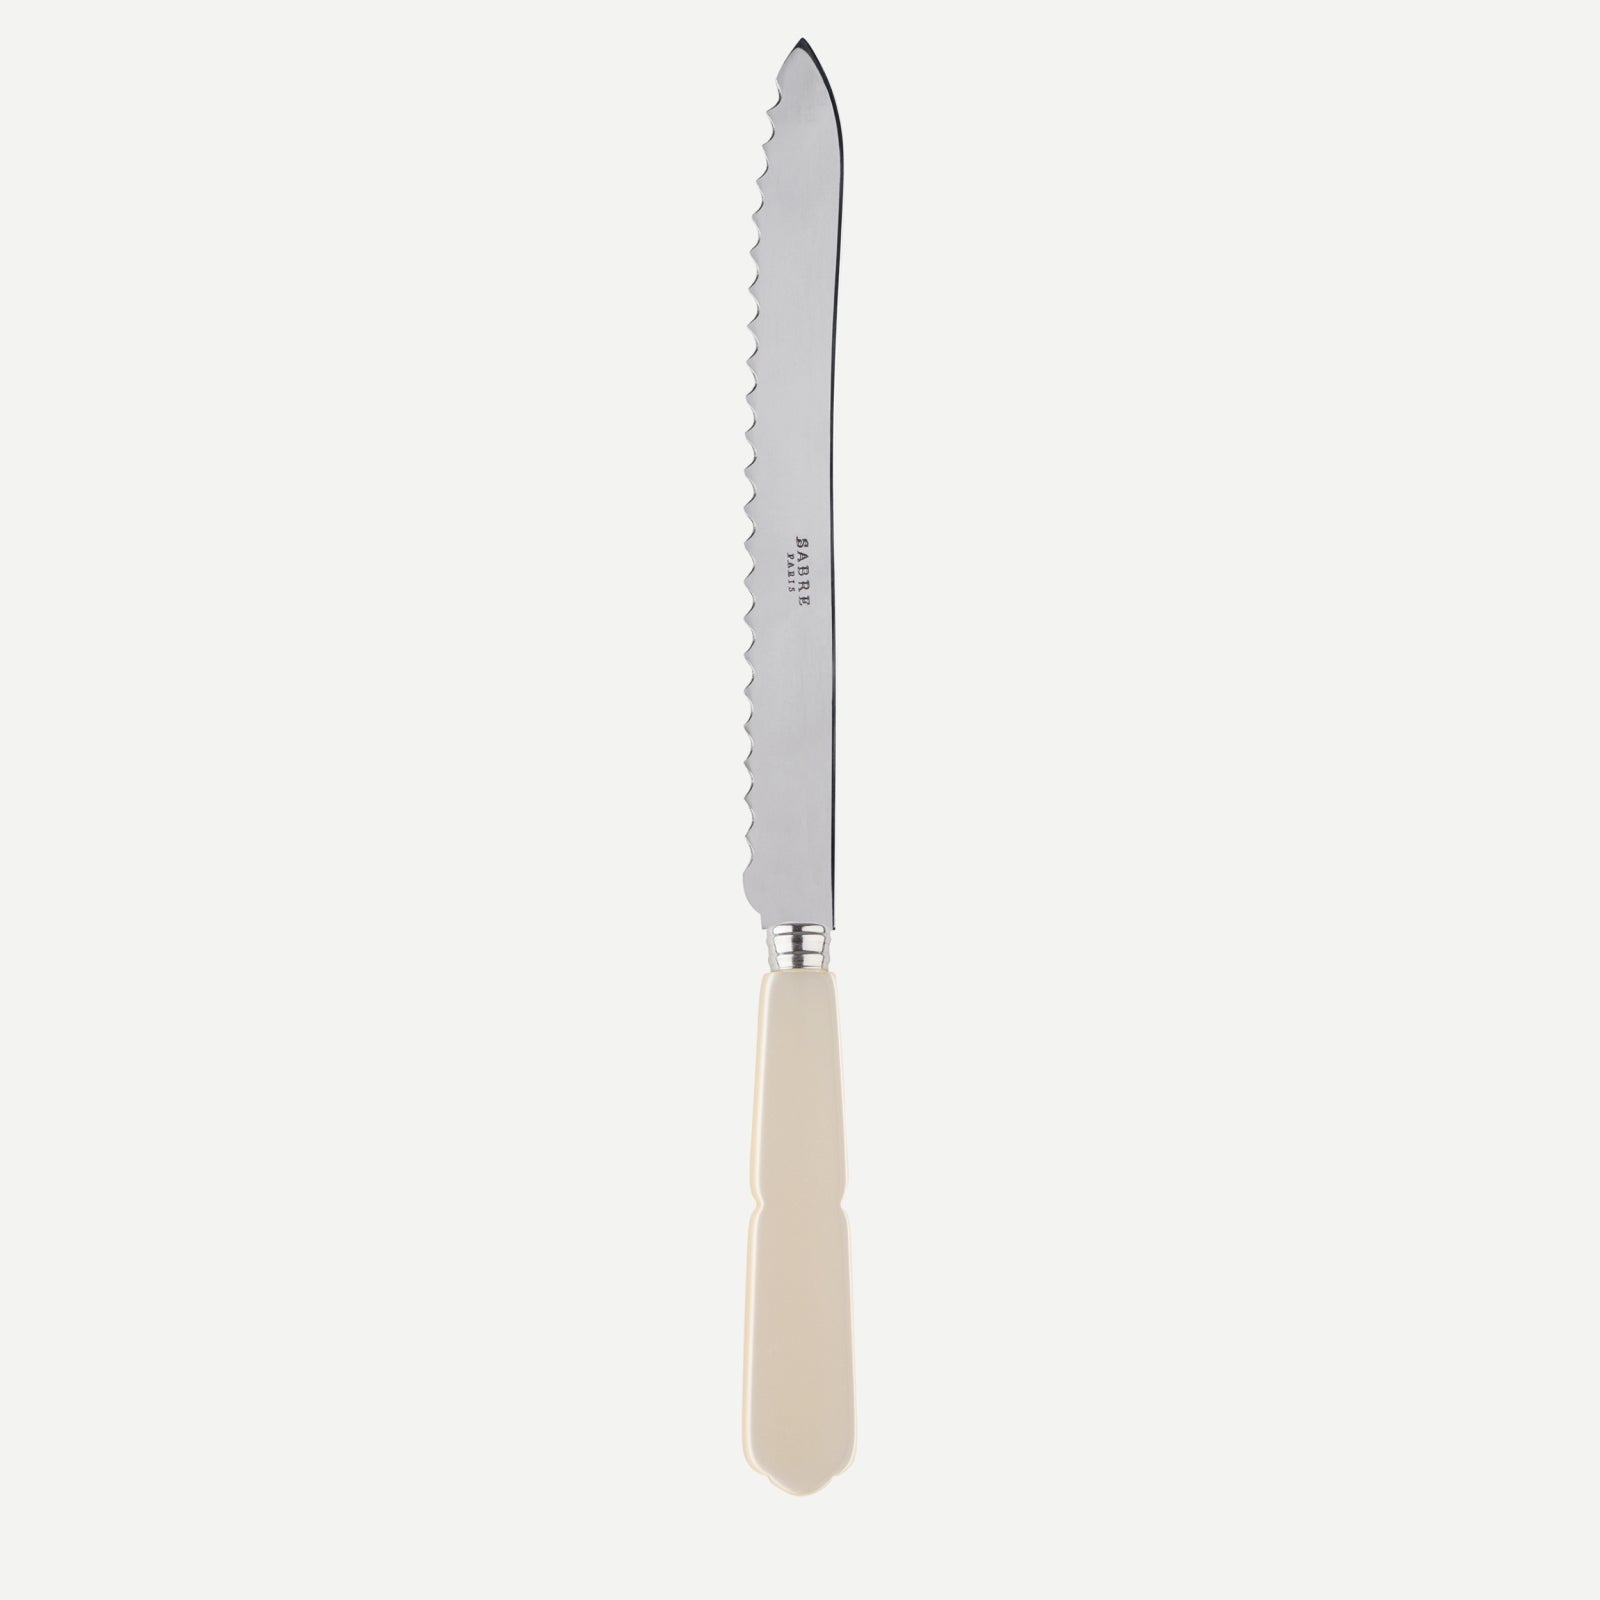 Bread knife - Gustave - Pearl